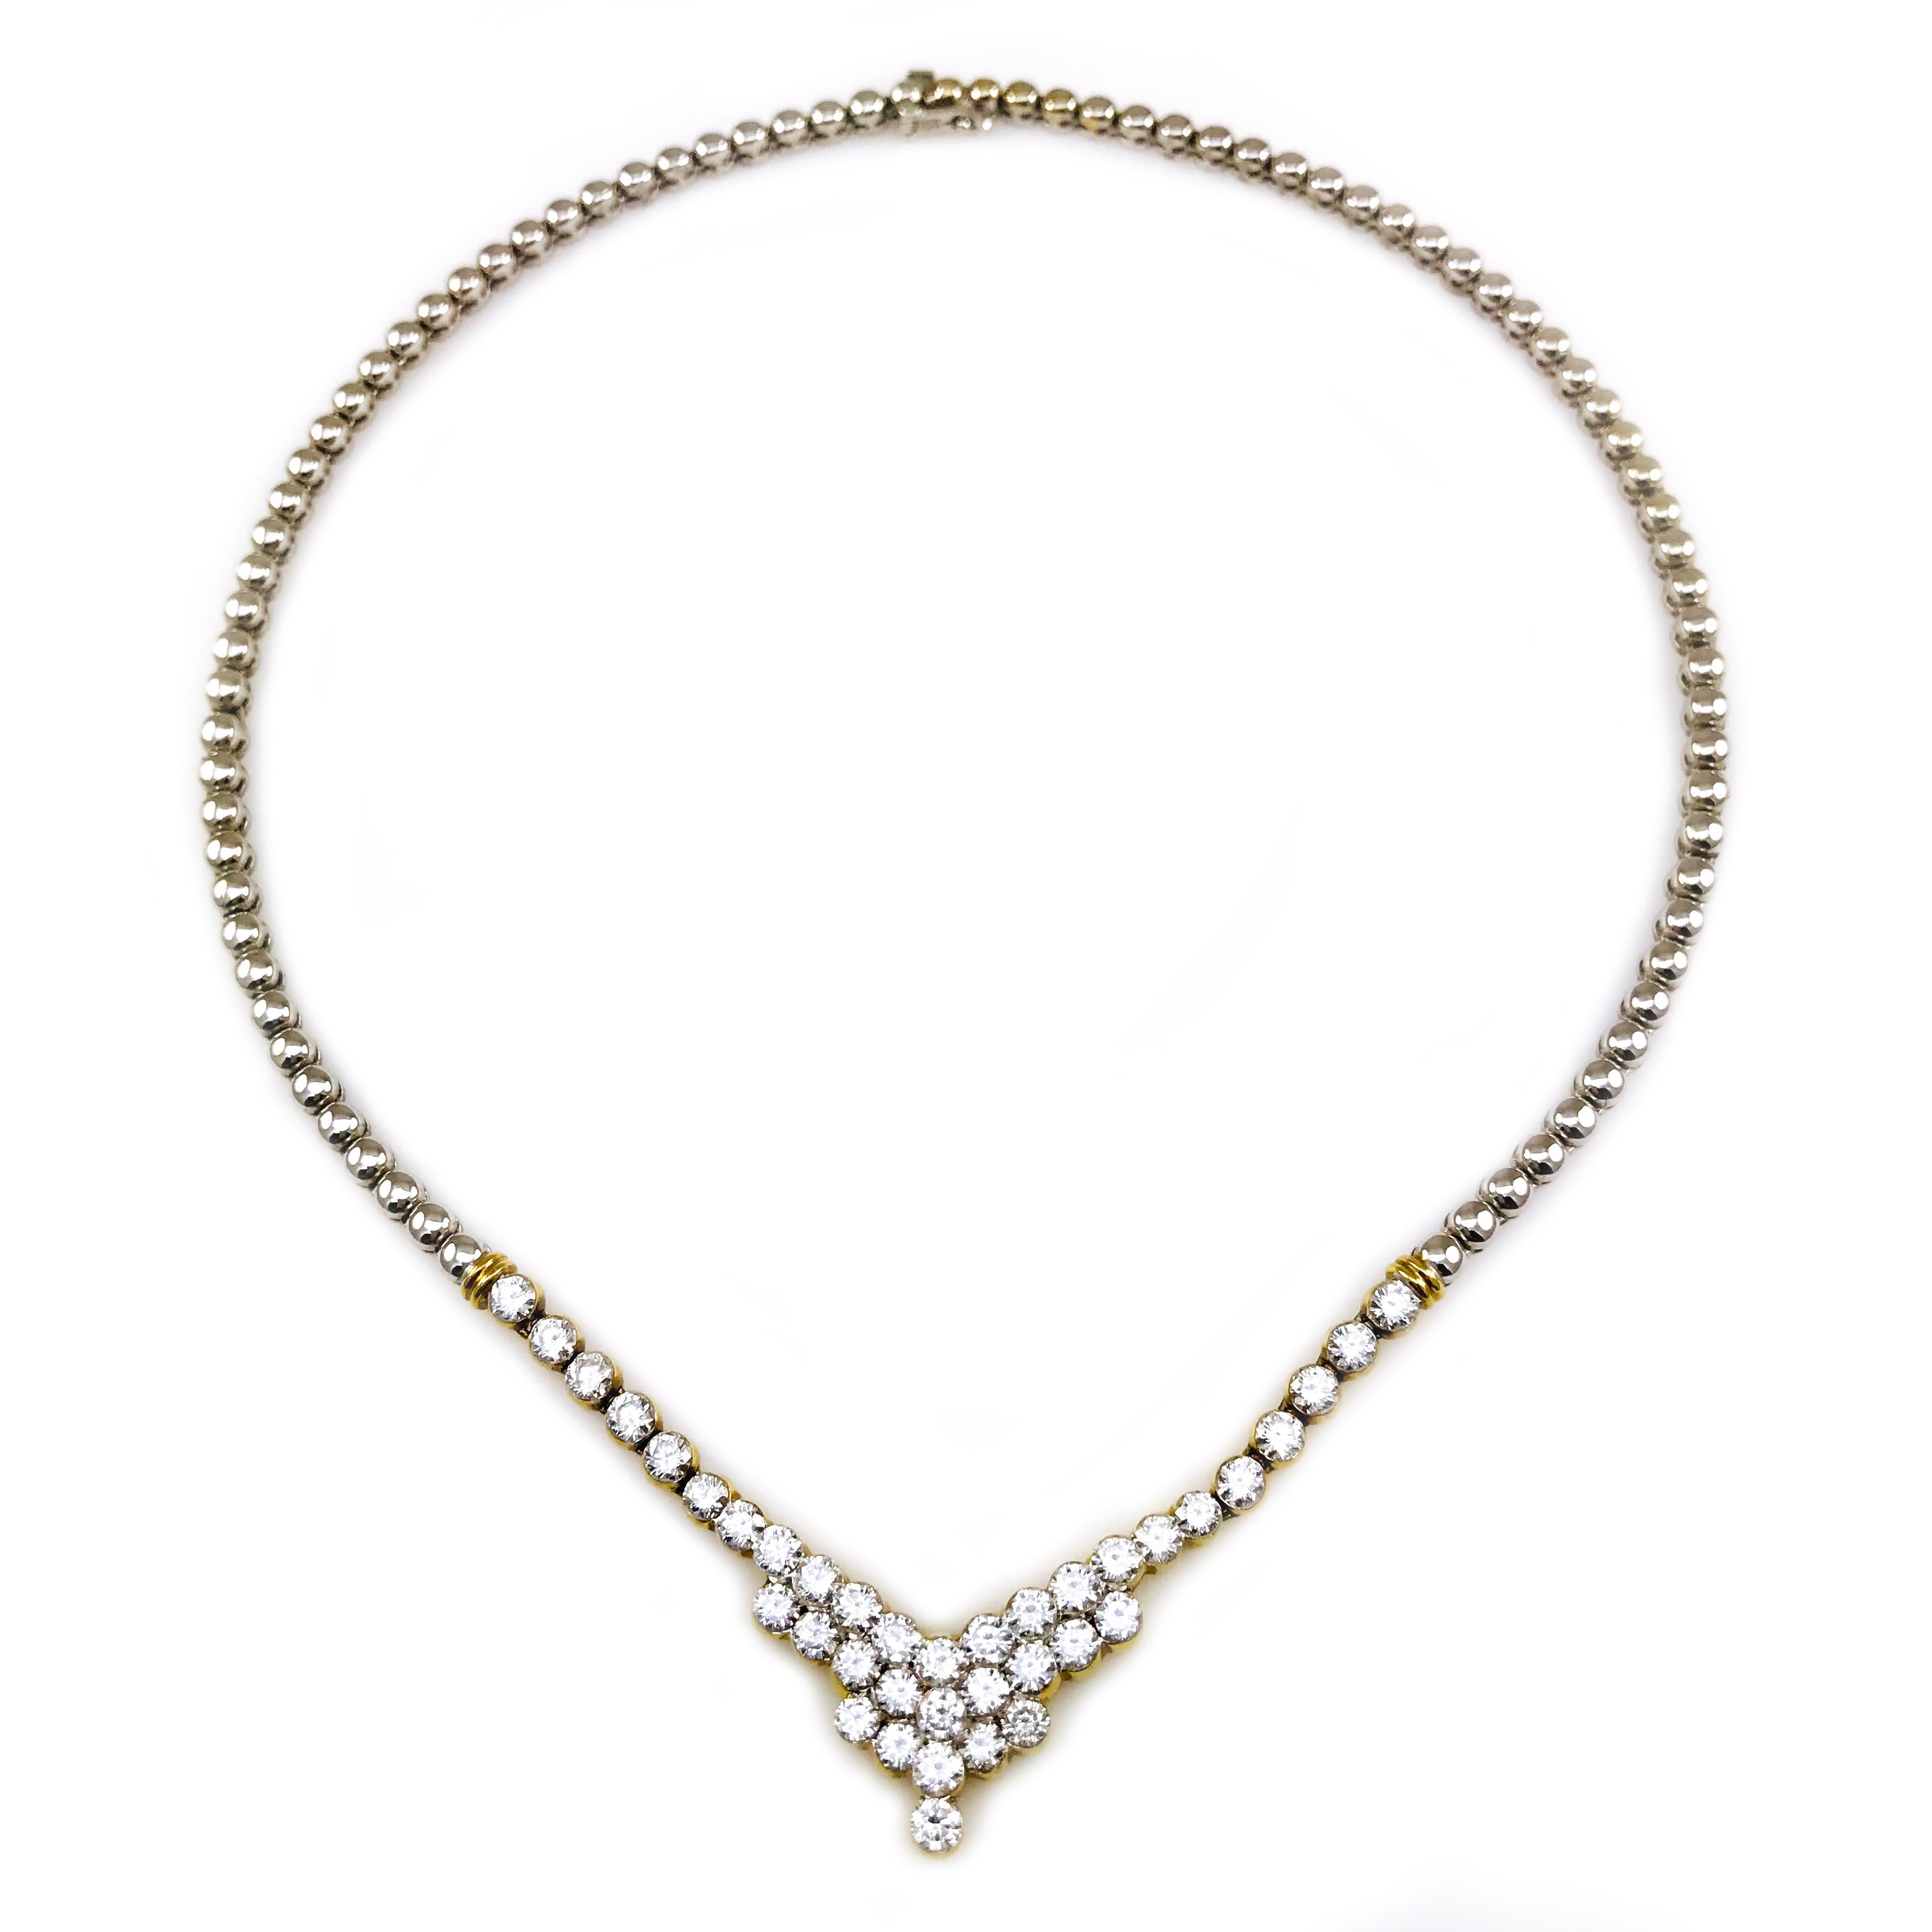 The electronically tested necklace features a chevron-style diamond motif, bordered by yellow gold stationed ridges, supported by a designer style white gold flexible chain, terminating in a concealed clasp with safety. Bright polish finish with